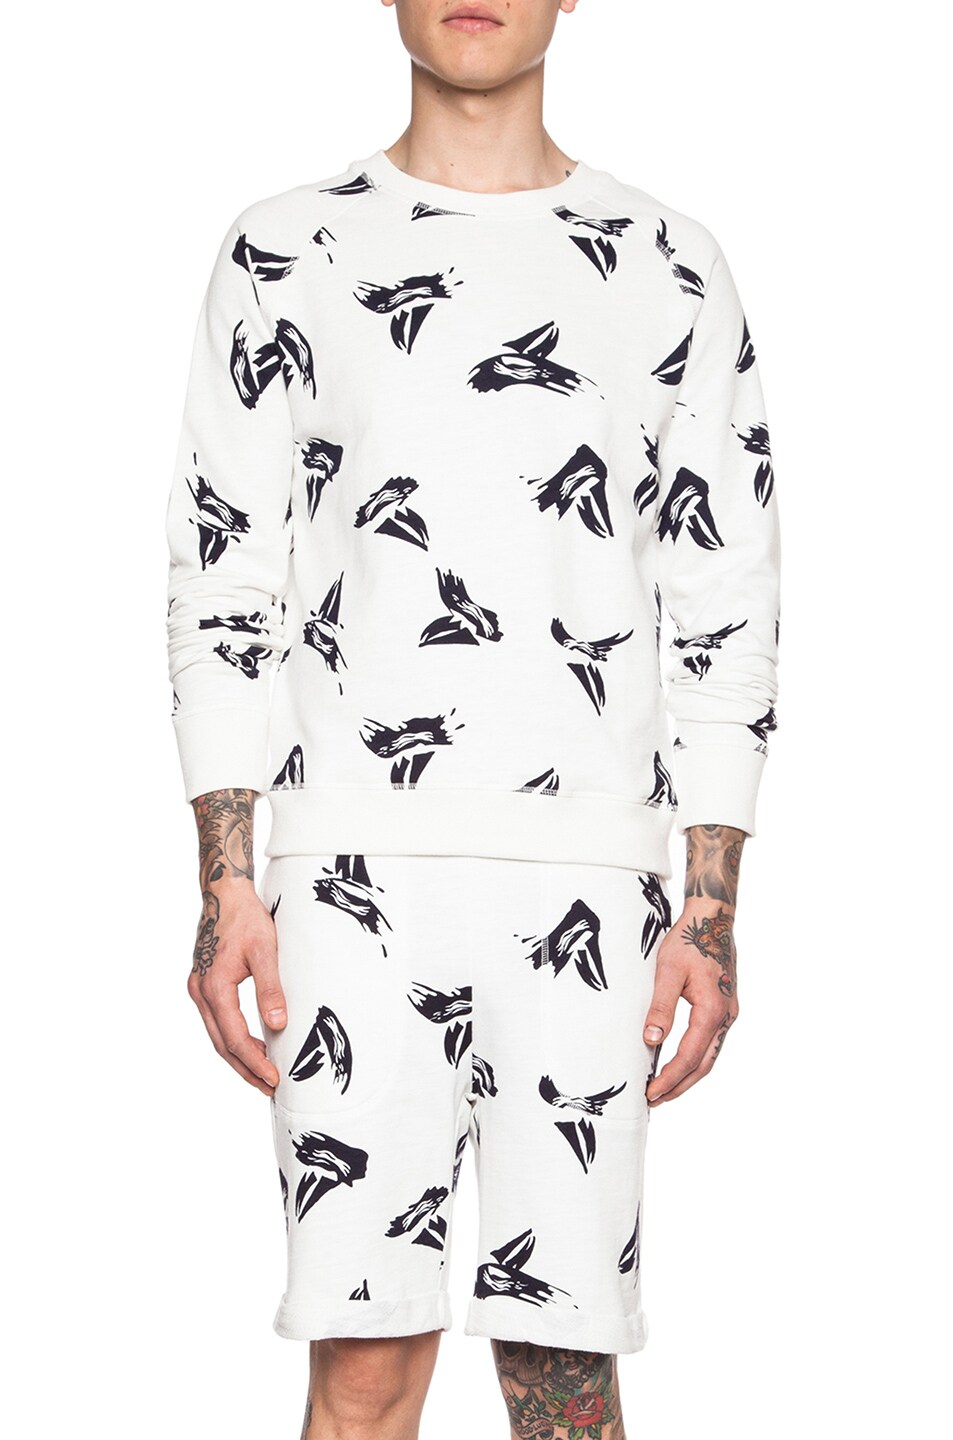 Image 1 of Band of Outsiders Sailboat Printed Cotton Sweatshirt in White Multi